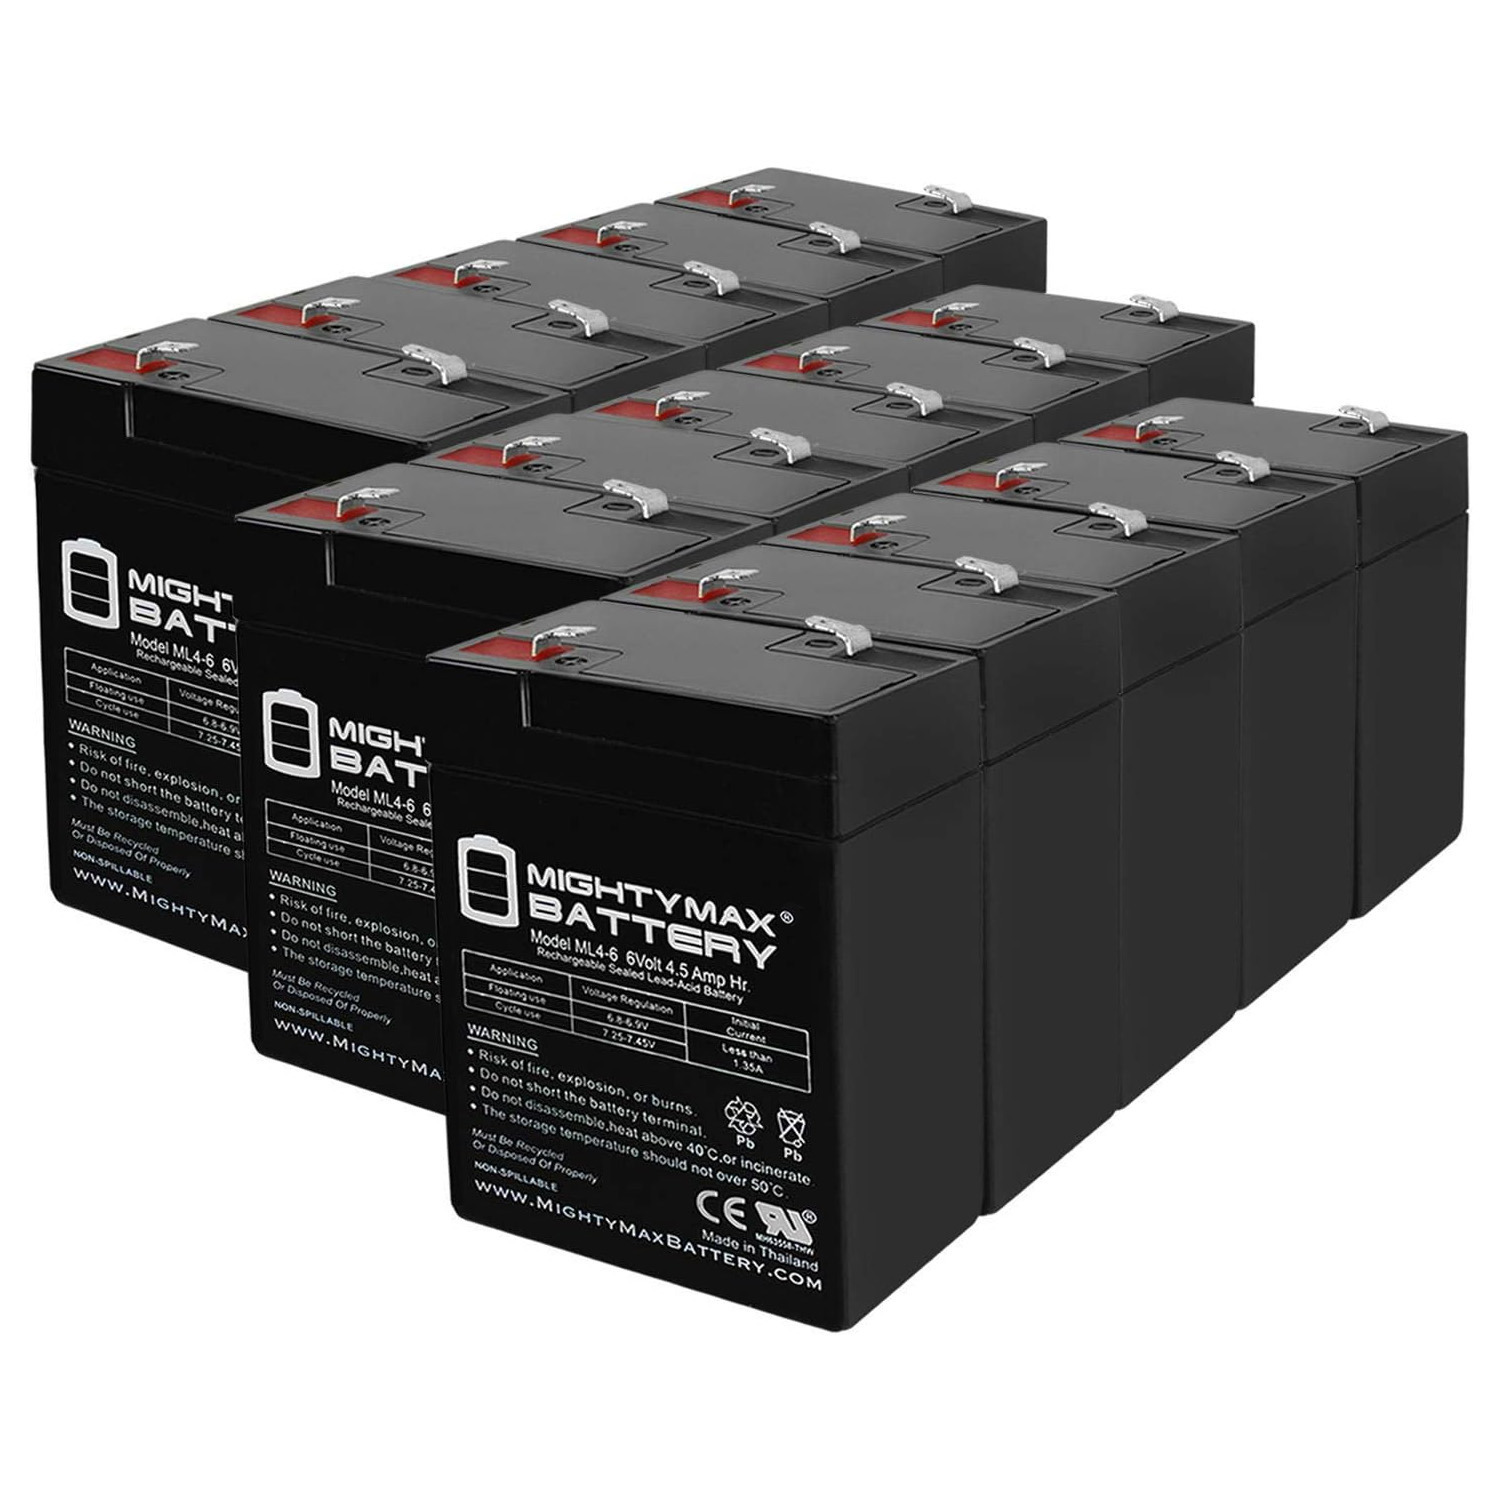 6V 4.5AH Replacement Battery for Powertron PS640 - 15 Pack